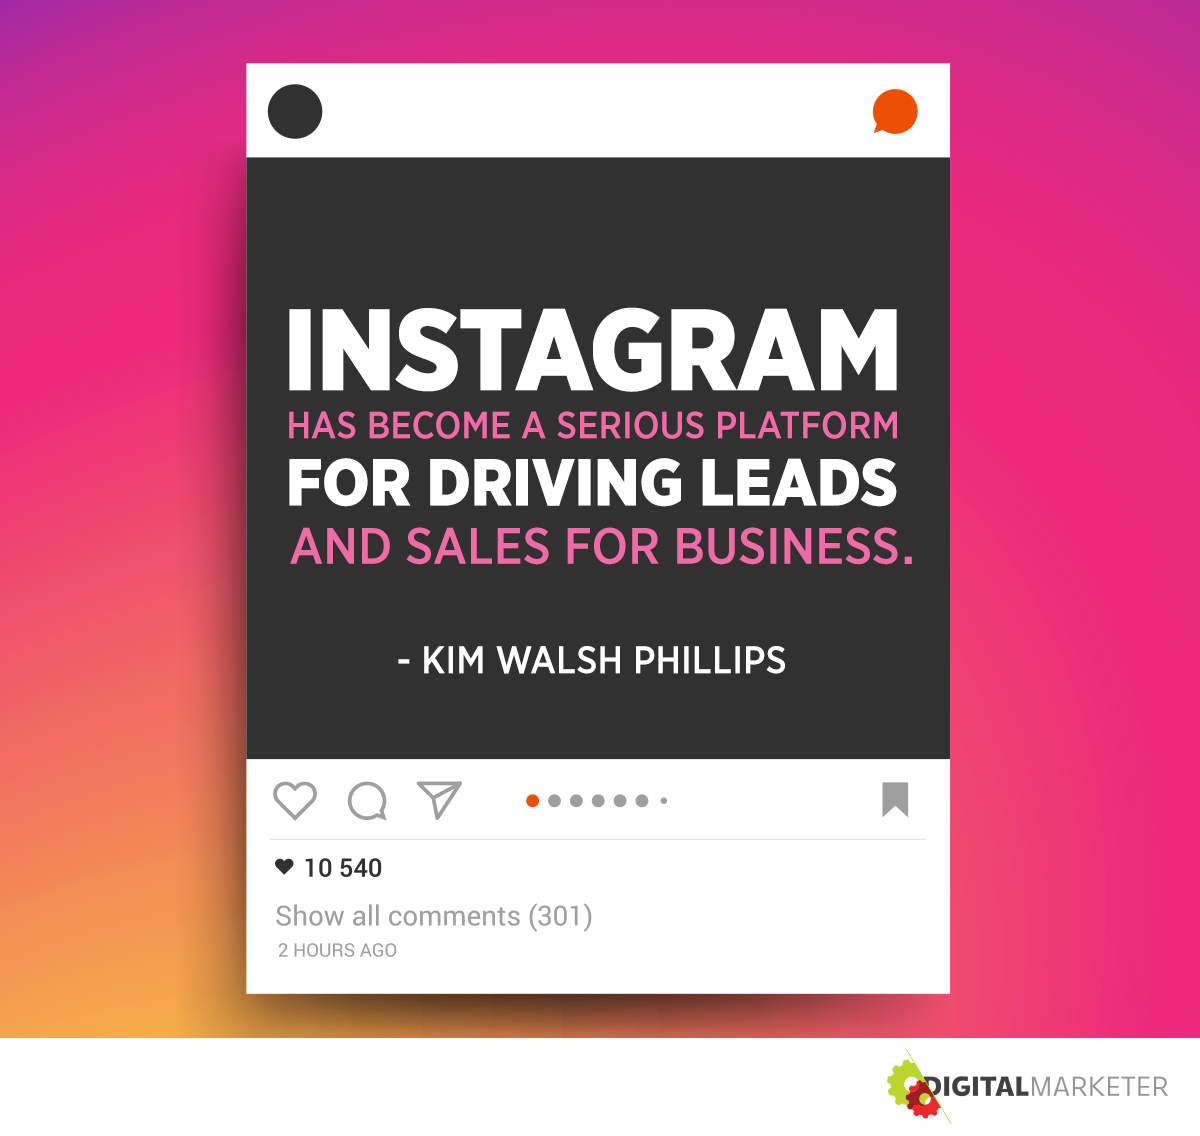 "Instagram has become a serious platform for driving leads and sales for business." ~Kim Walsh-Phillips